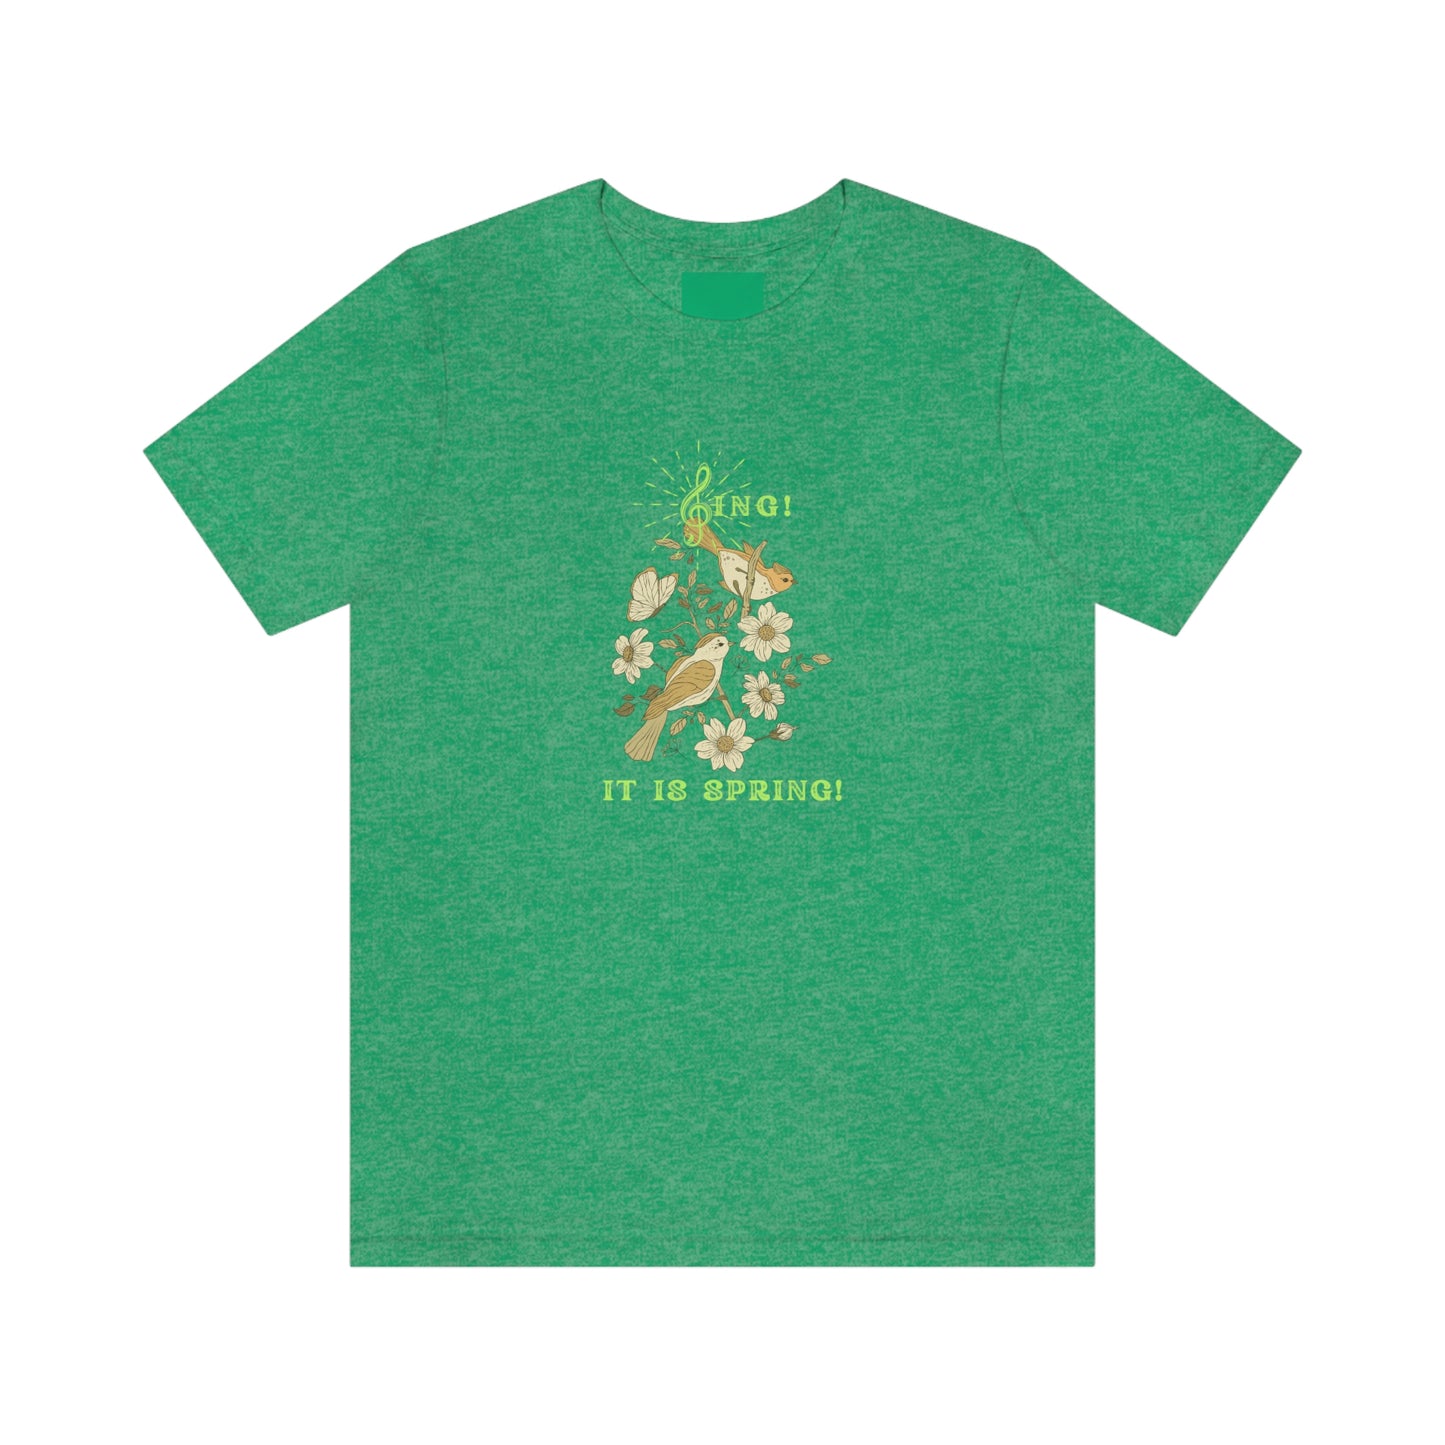 SING IT IS SPRING UNISEX CREW NECK TEE SHIRT WITH GREEN FONT